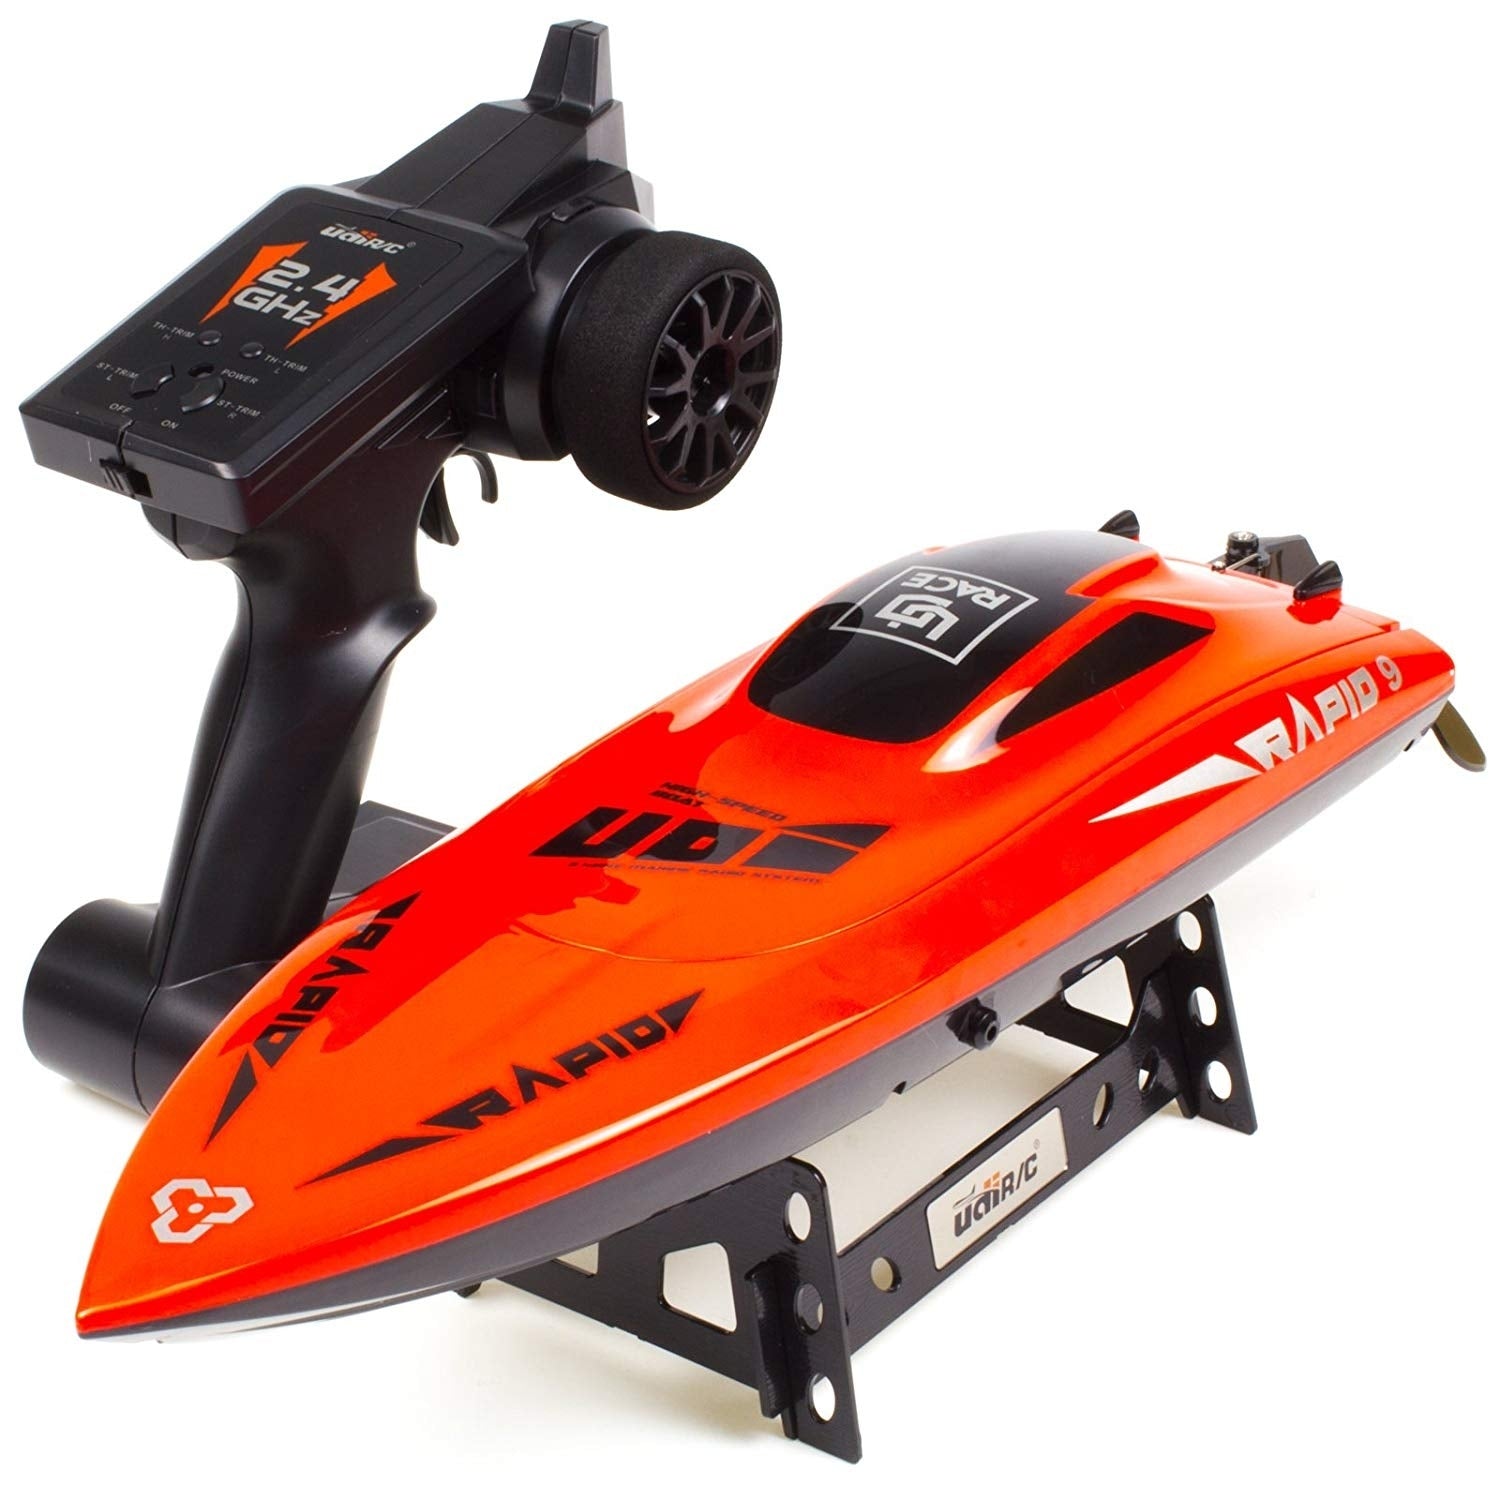 UDIRC RC Boat 2.4Ghz Remote Control High Speed Electronic Racing Boat UDI009